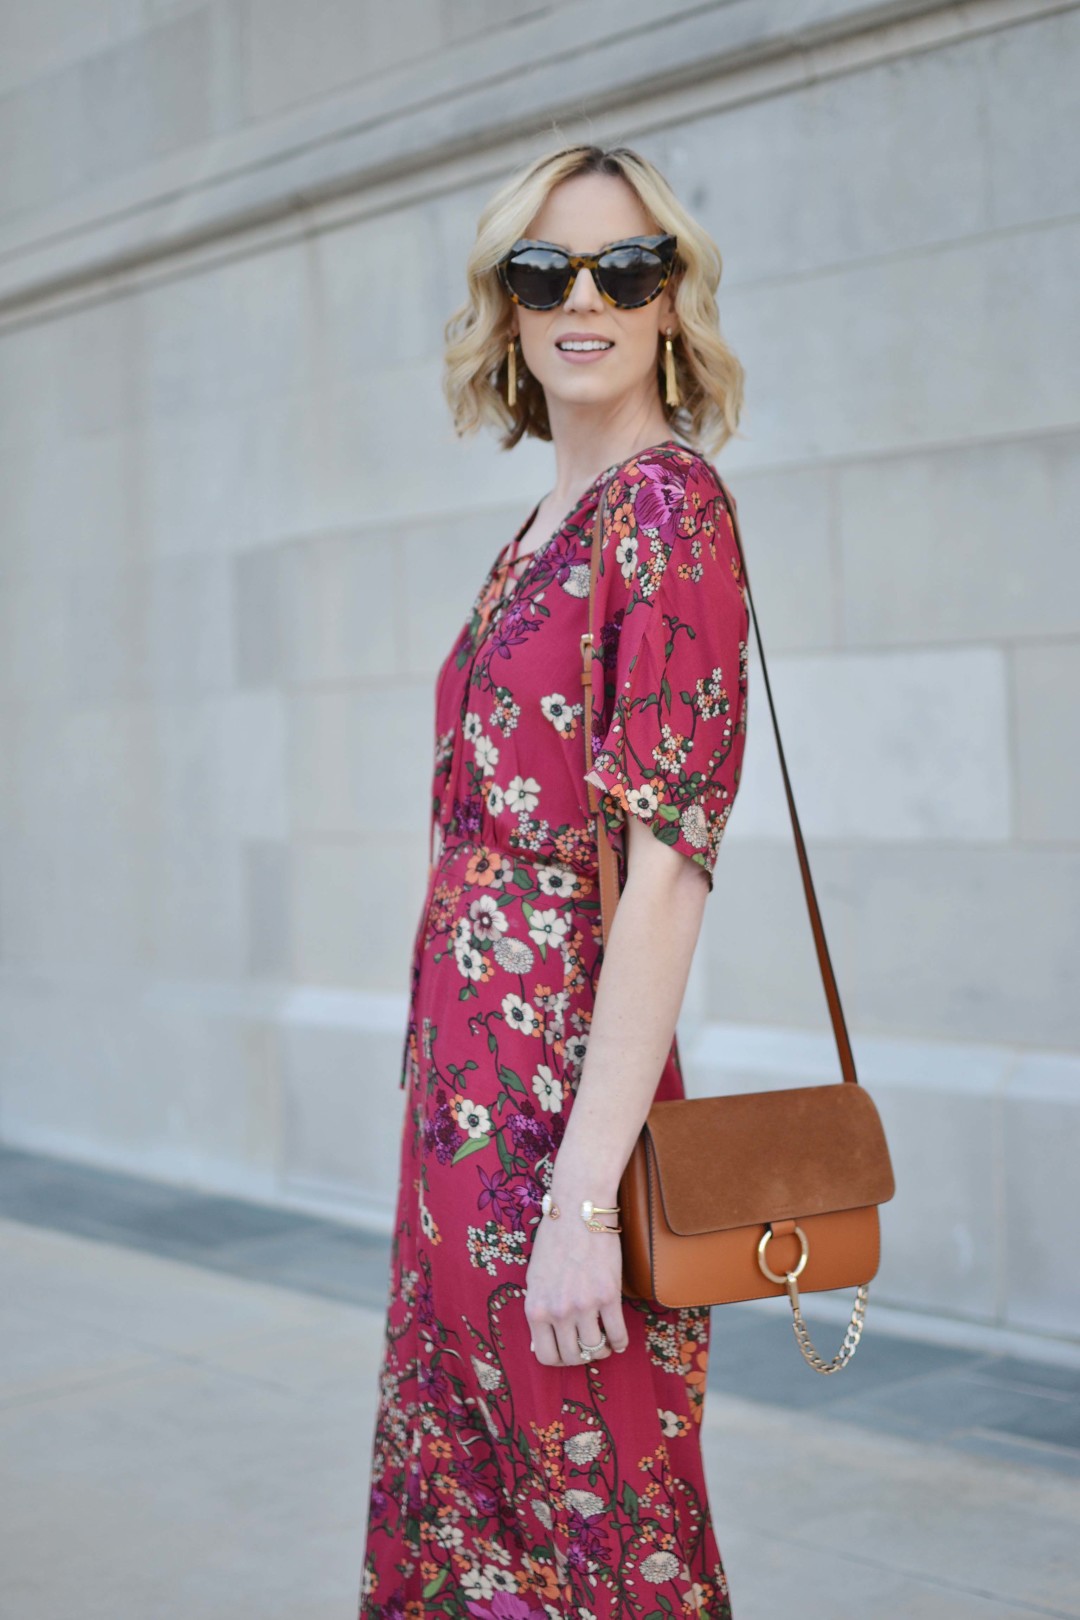 Floral Maxi Dress - Straight A Style